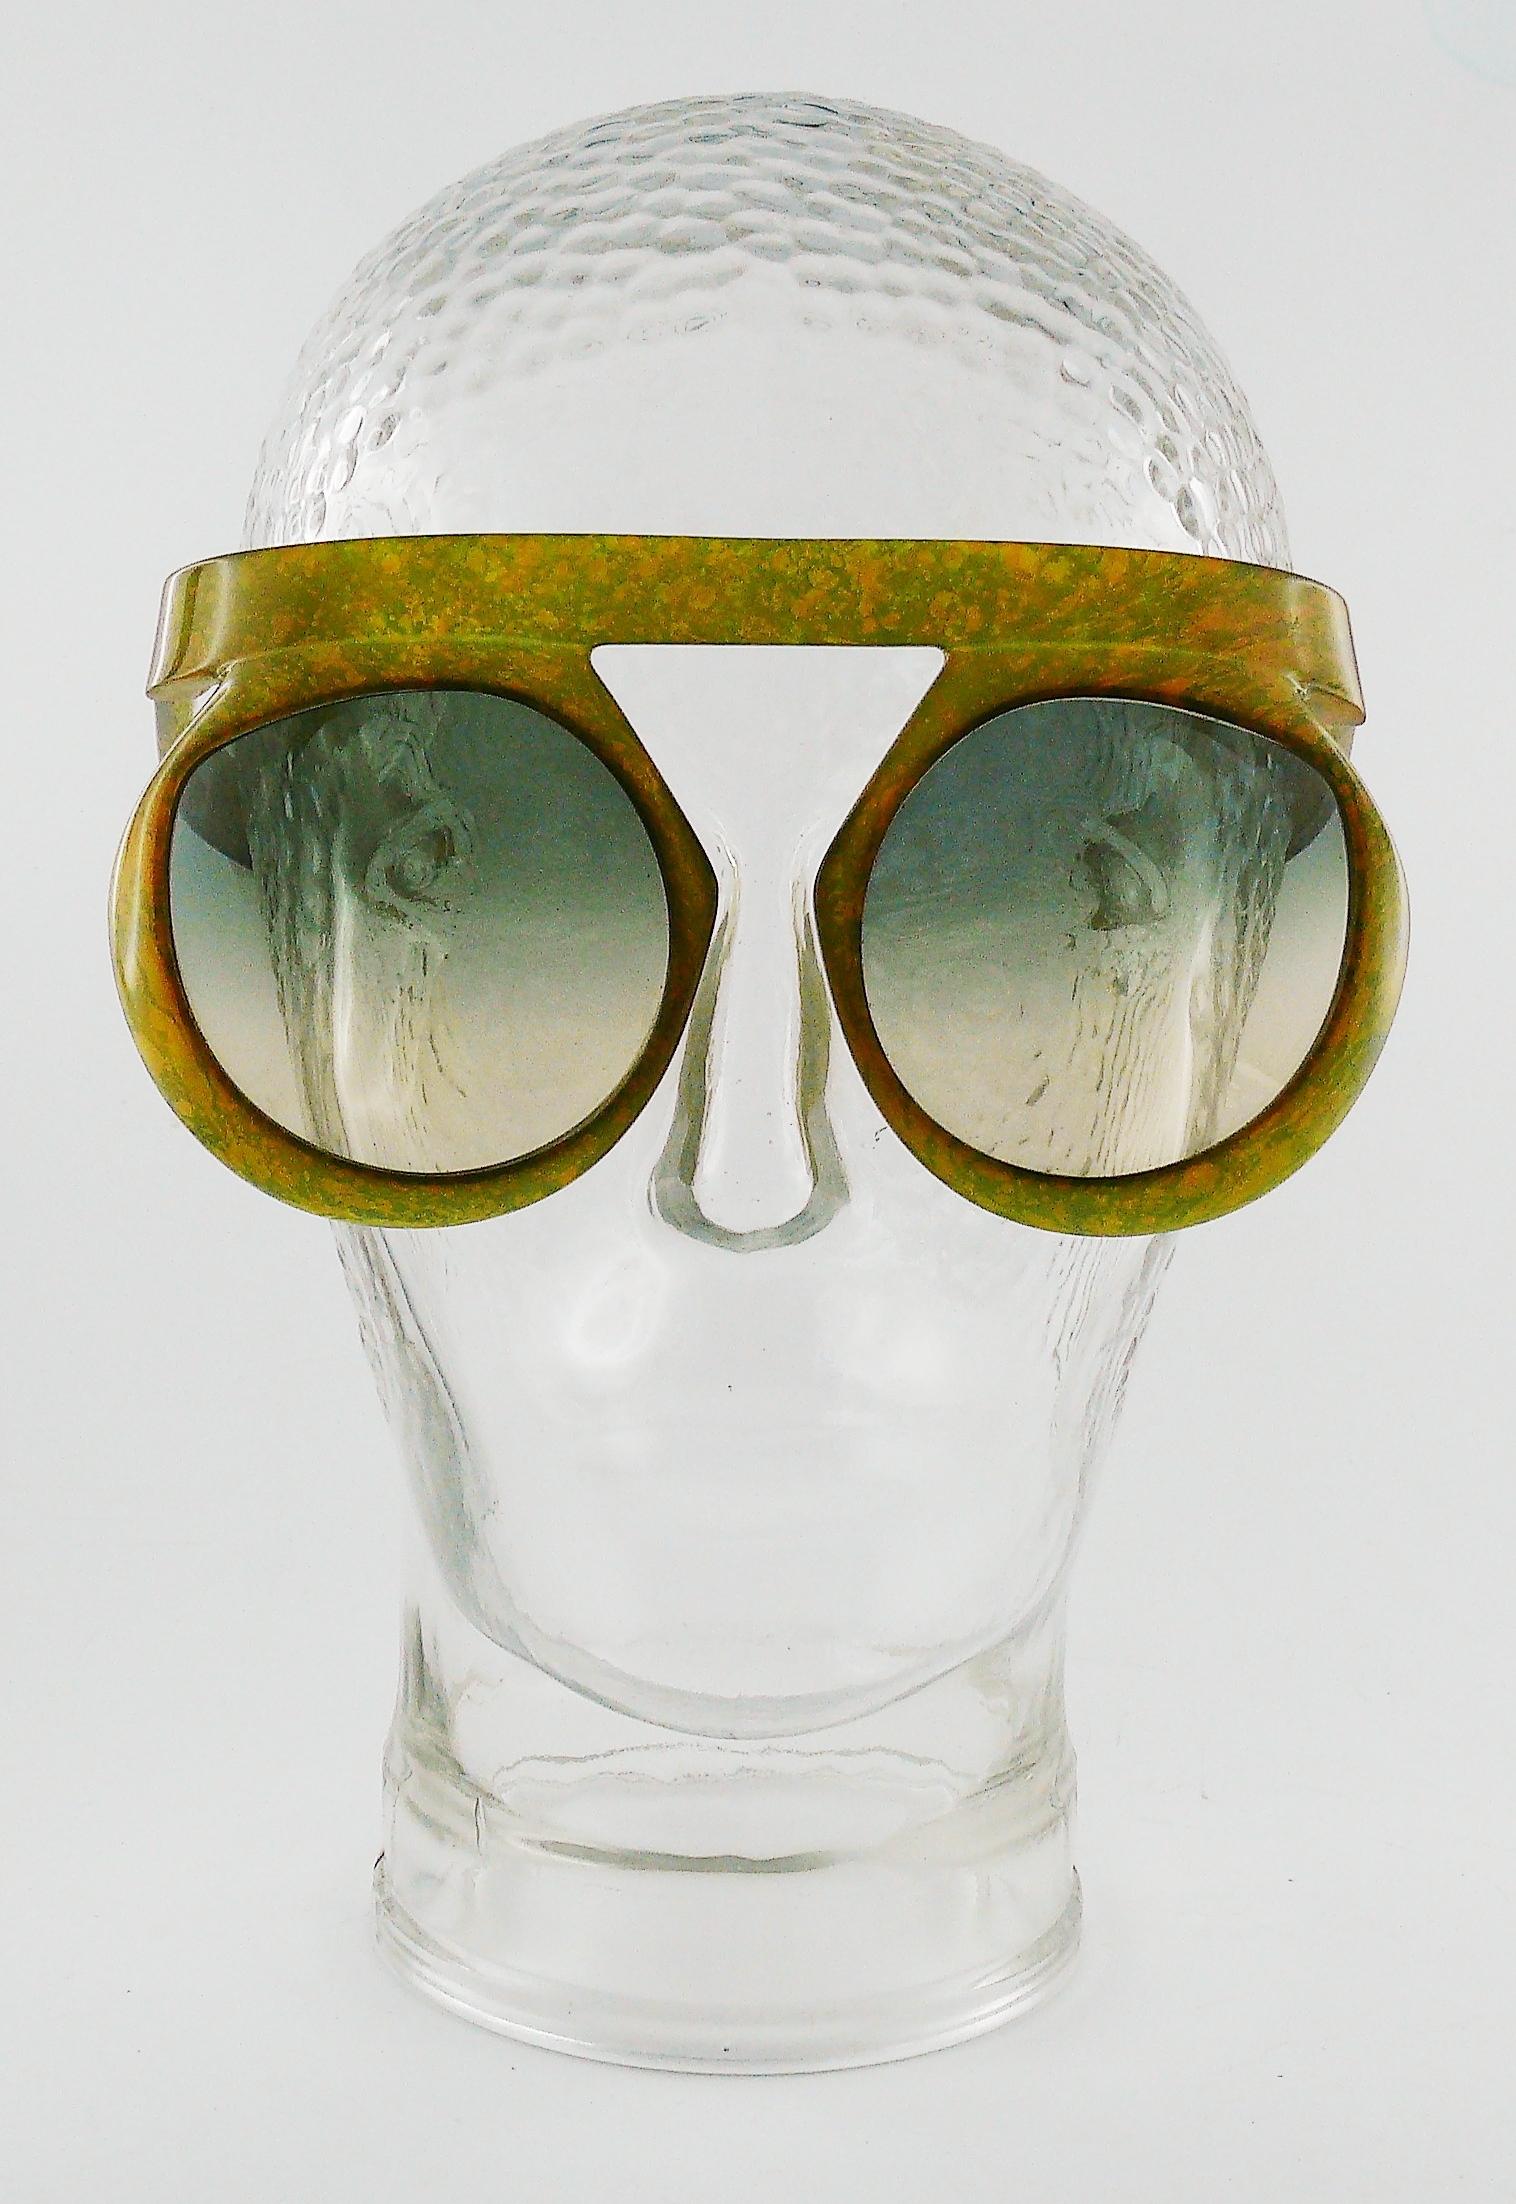 Brown Christian Dior Vintage 1970s Oversized Space Age Sunglasses Mod. 2030-50